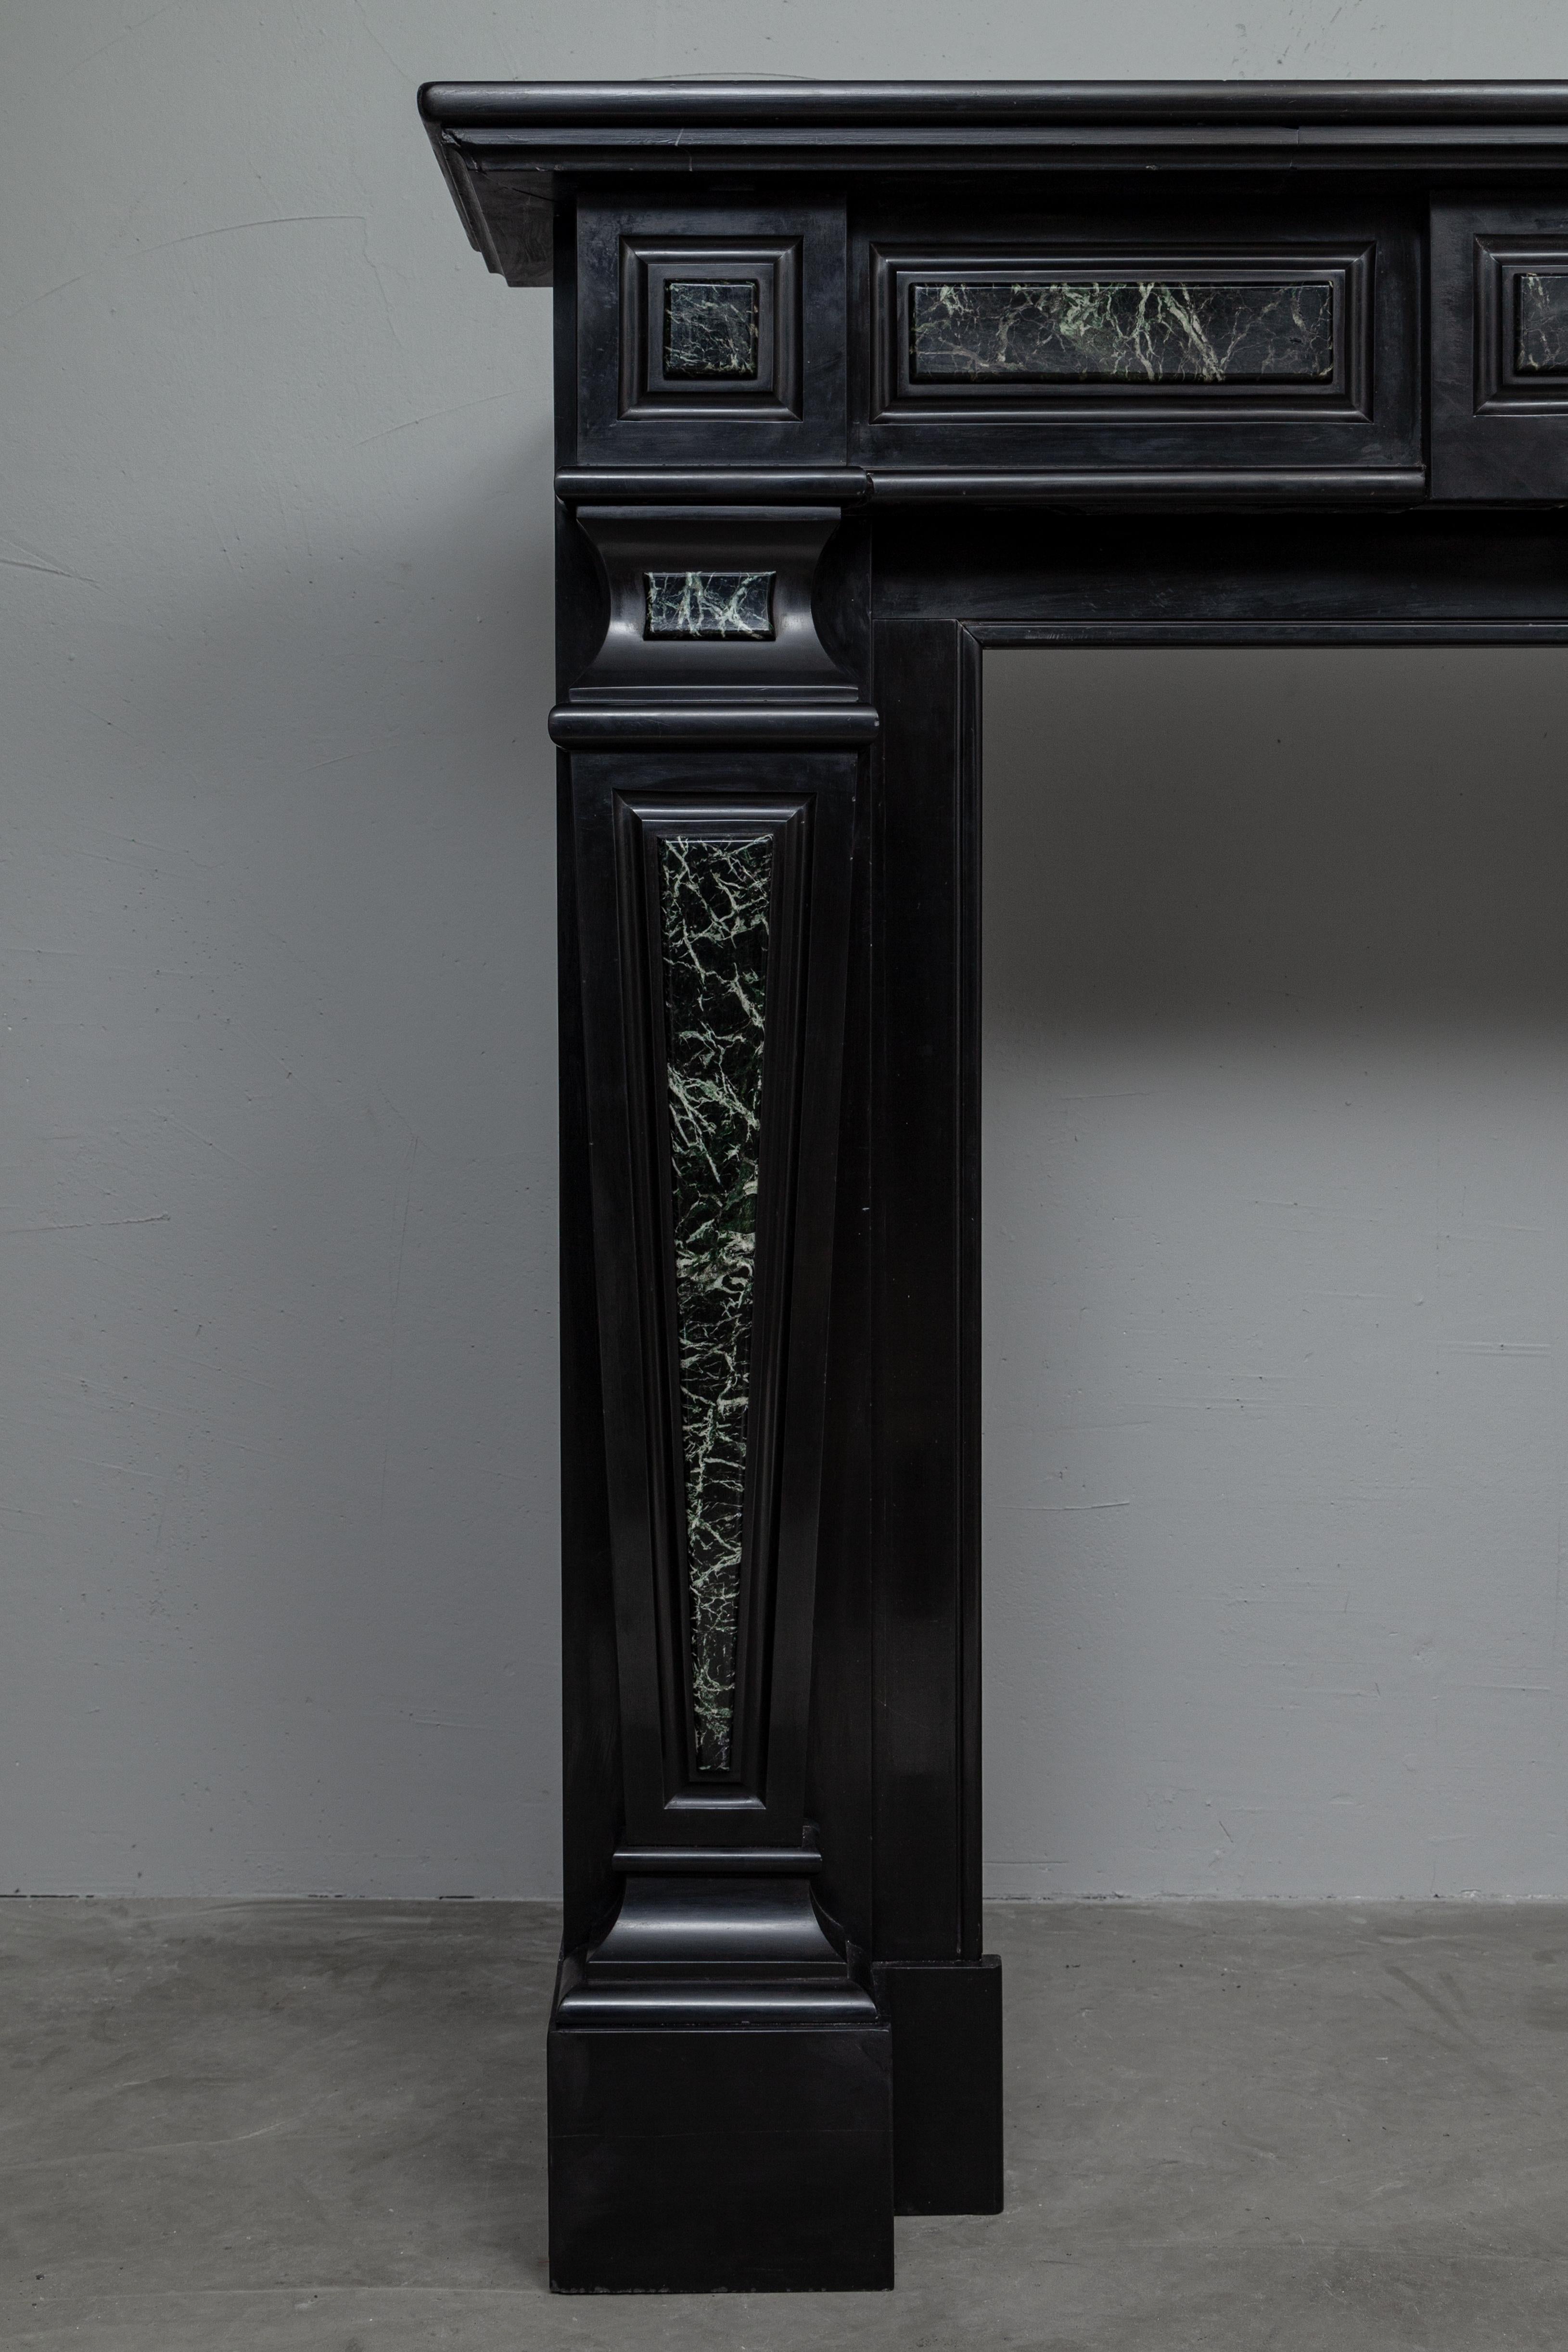 Empire-style black marble fireplace.
This extraordinary fireplace is made of Noir de Mazy marble, complemented by the luxurious green marble type Verde. Despite the clean lines, this is a very elegant piece. The richly executed consoles are a true